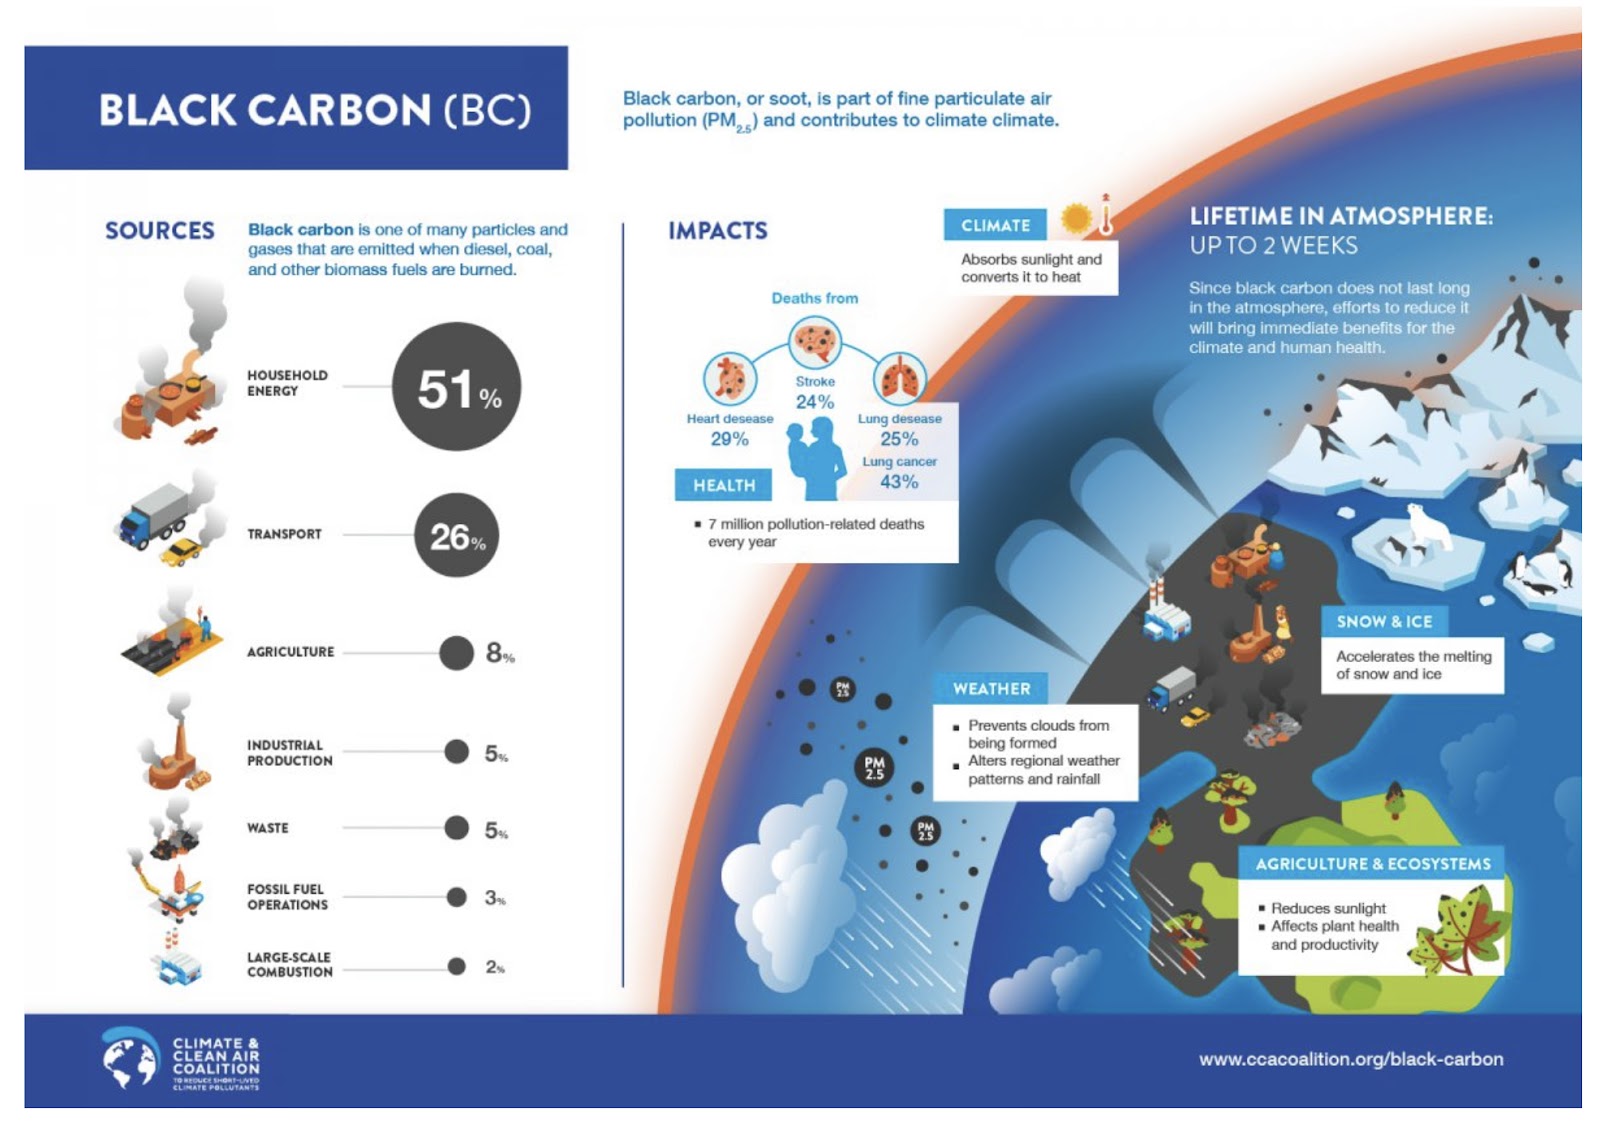 BLACK CARBON 101: WHY IS THIS AIR POLLUTANT'S EFFECT ON CLIMATE